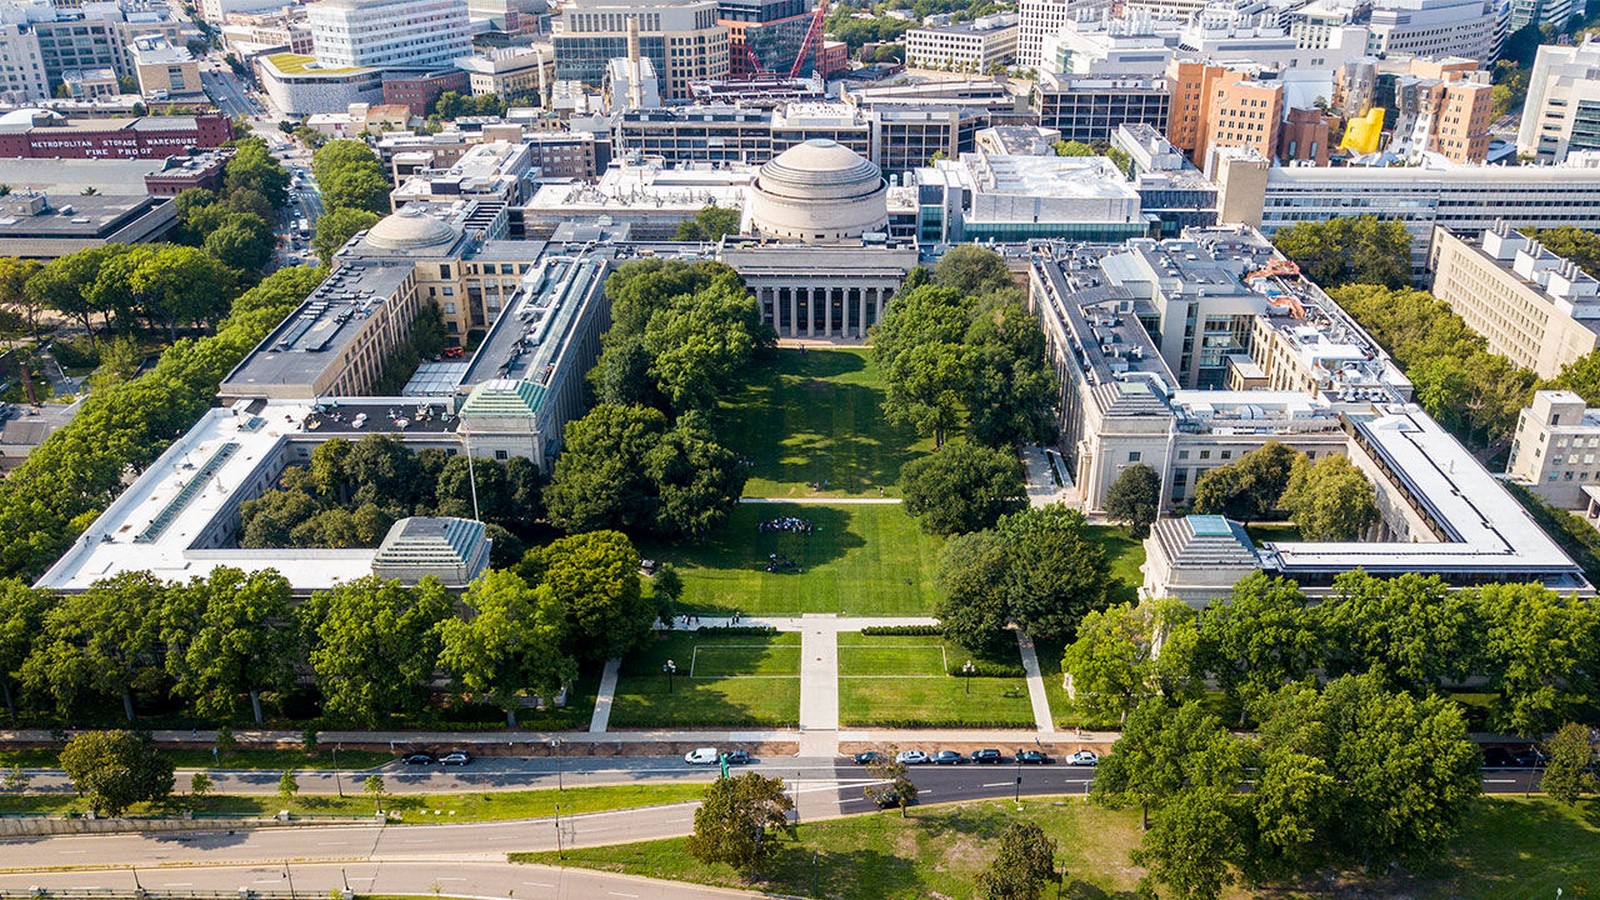 Top 10 colleges for pursuing Architectural History and Theory - Sheet1